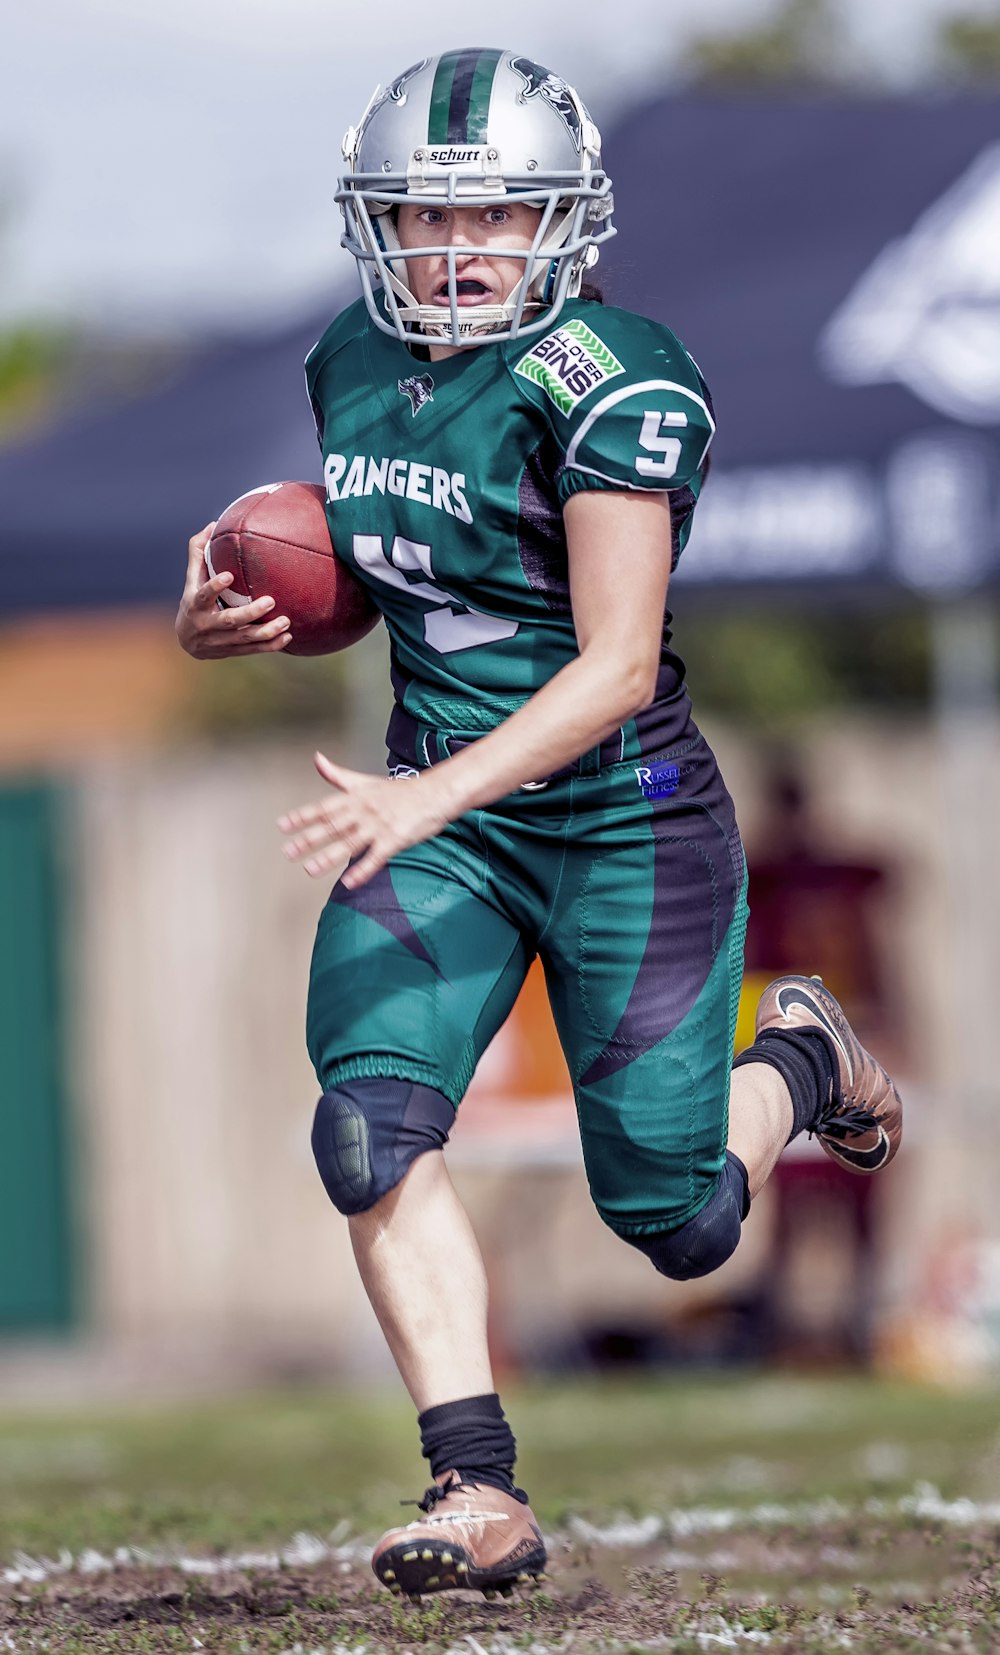 football player holding football while running